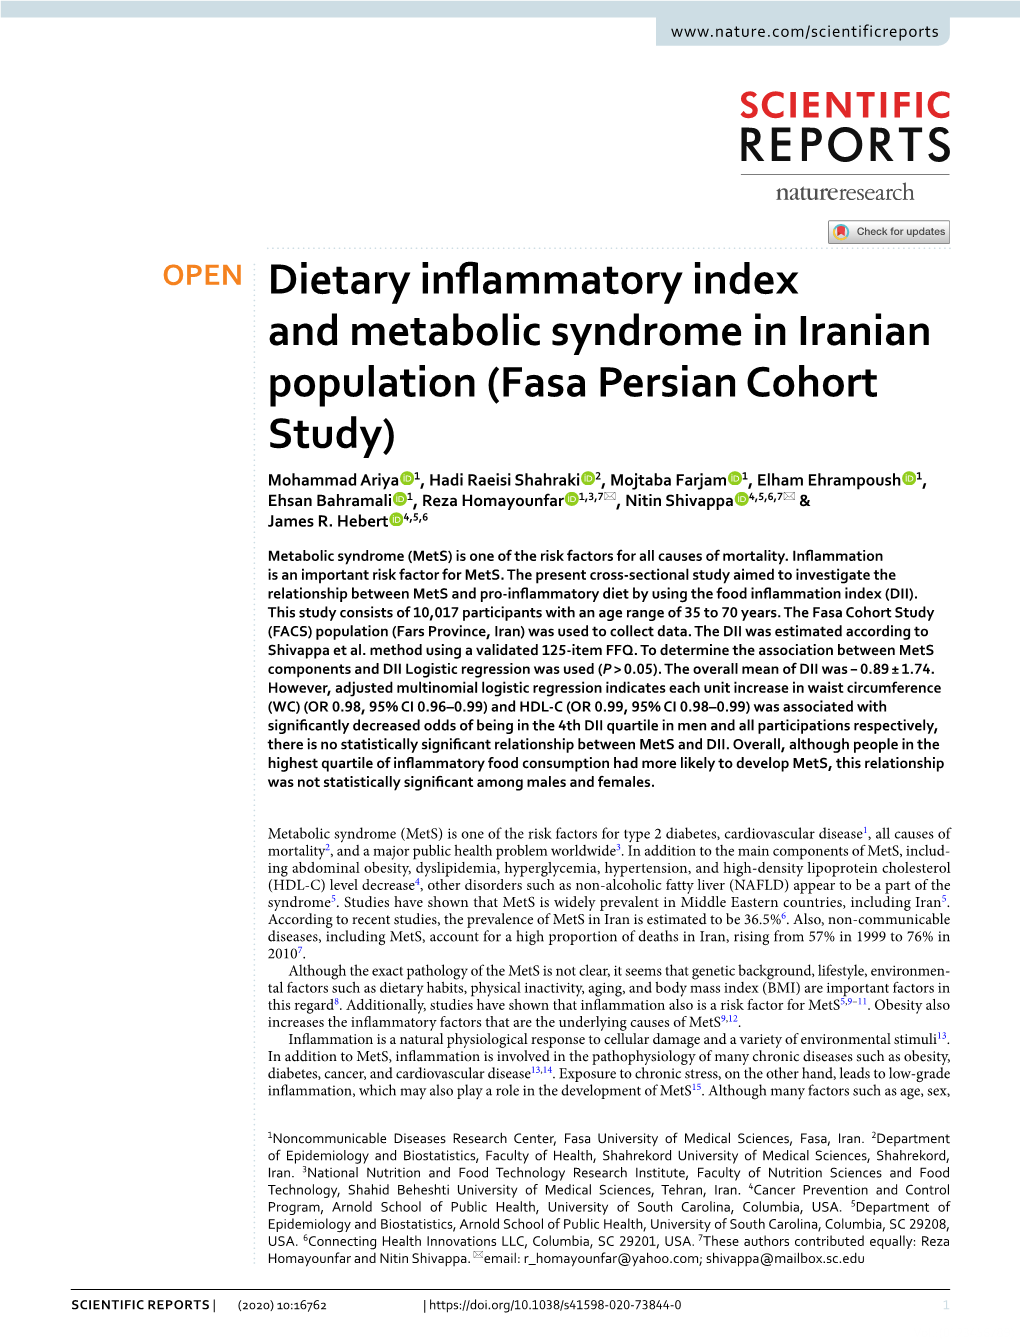 Dietary Inflammatory Index and Metabolic Syndrome in Iranian